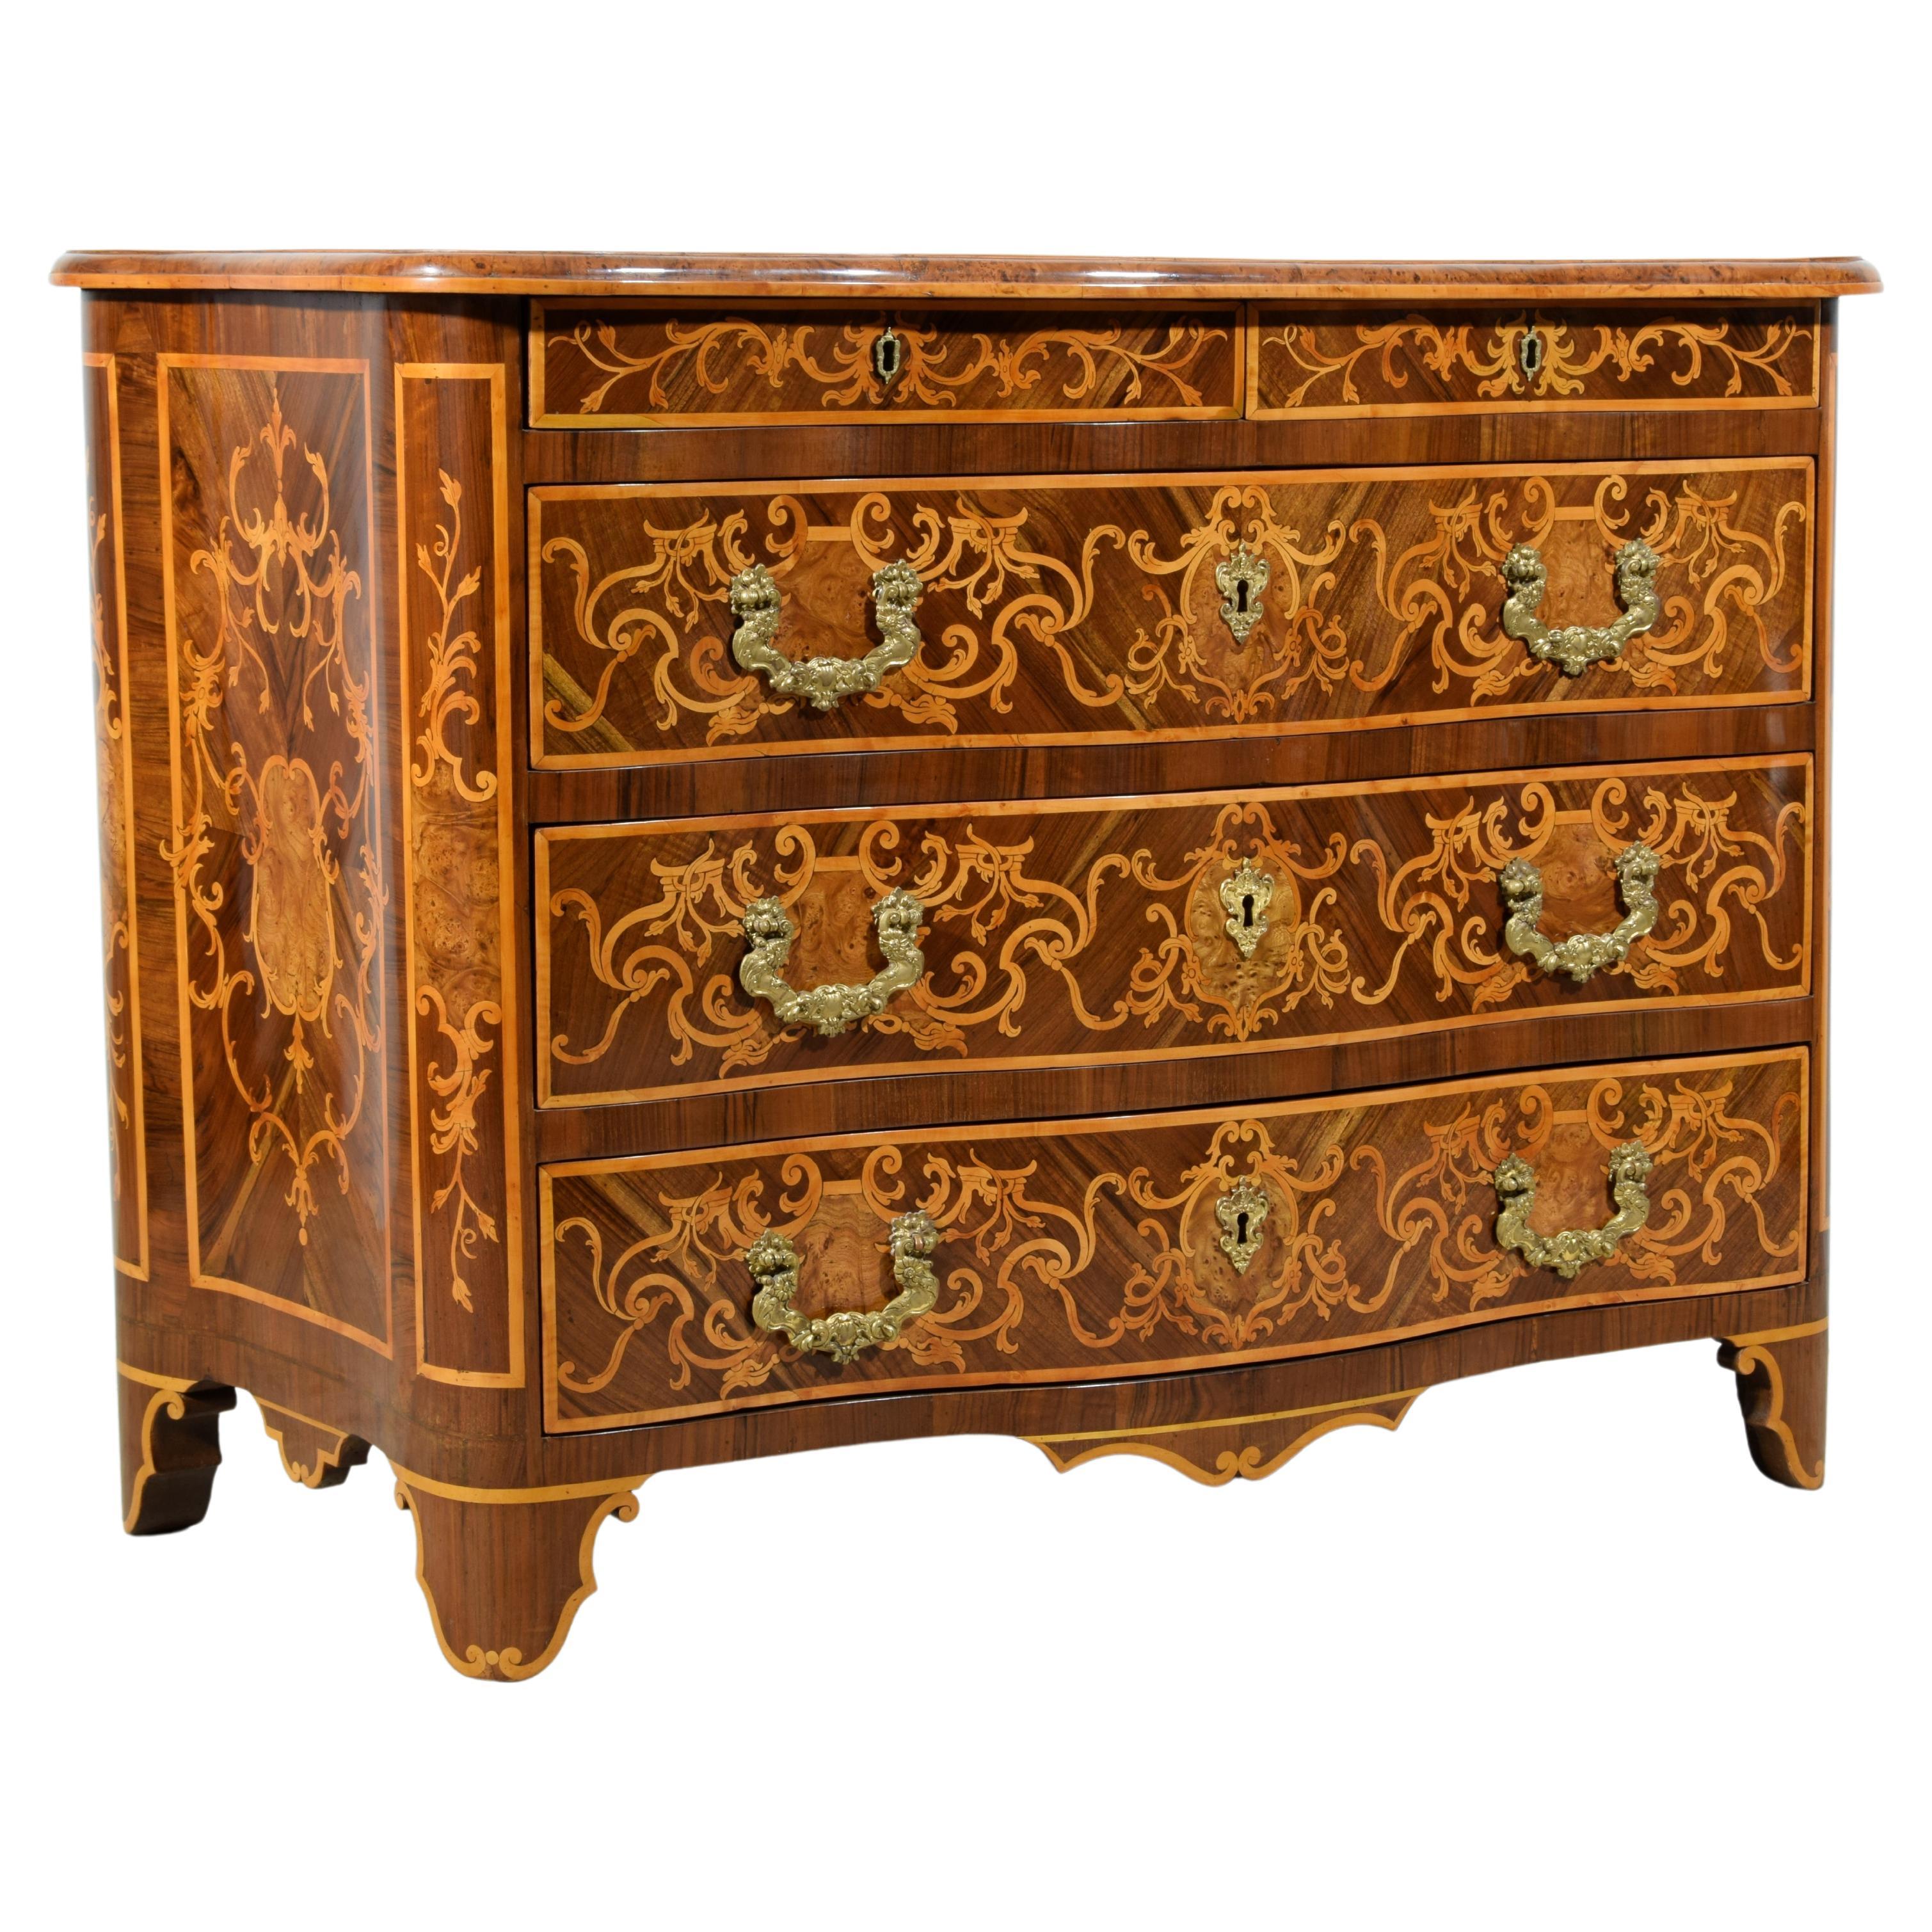 18th Century Italian Paved and Inlaid Wood Chest of Drawers